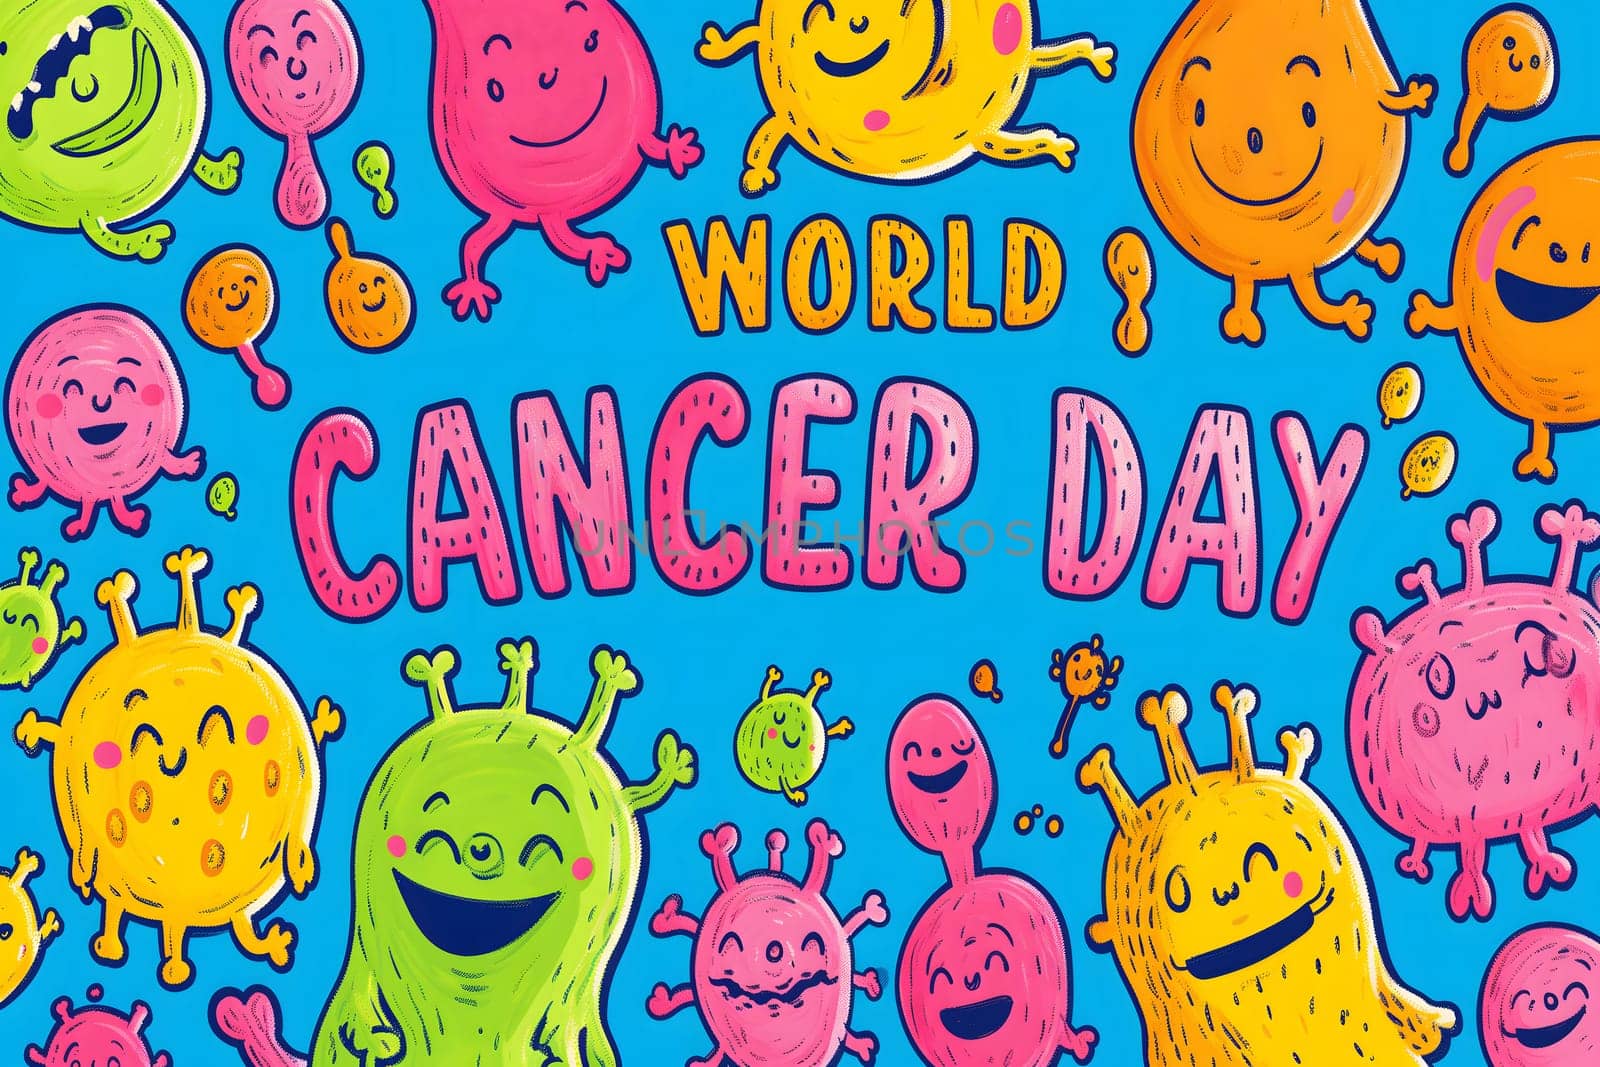 Simple cartoon world cancer day background with the inscription on it, surrounded with colorful happy tumors. Neural network generated image. Not based on any actual scene or pattern.